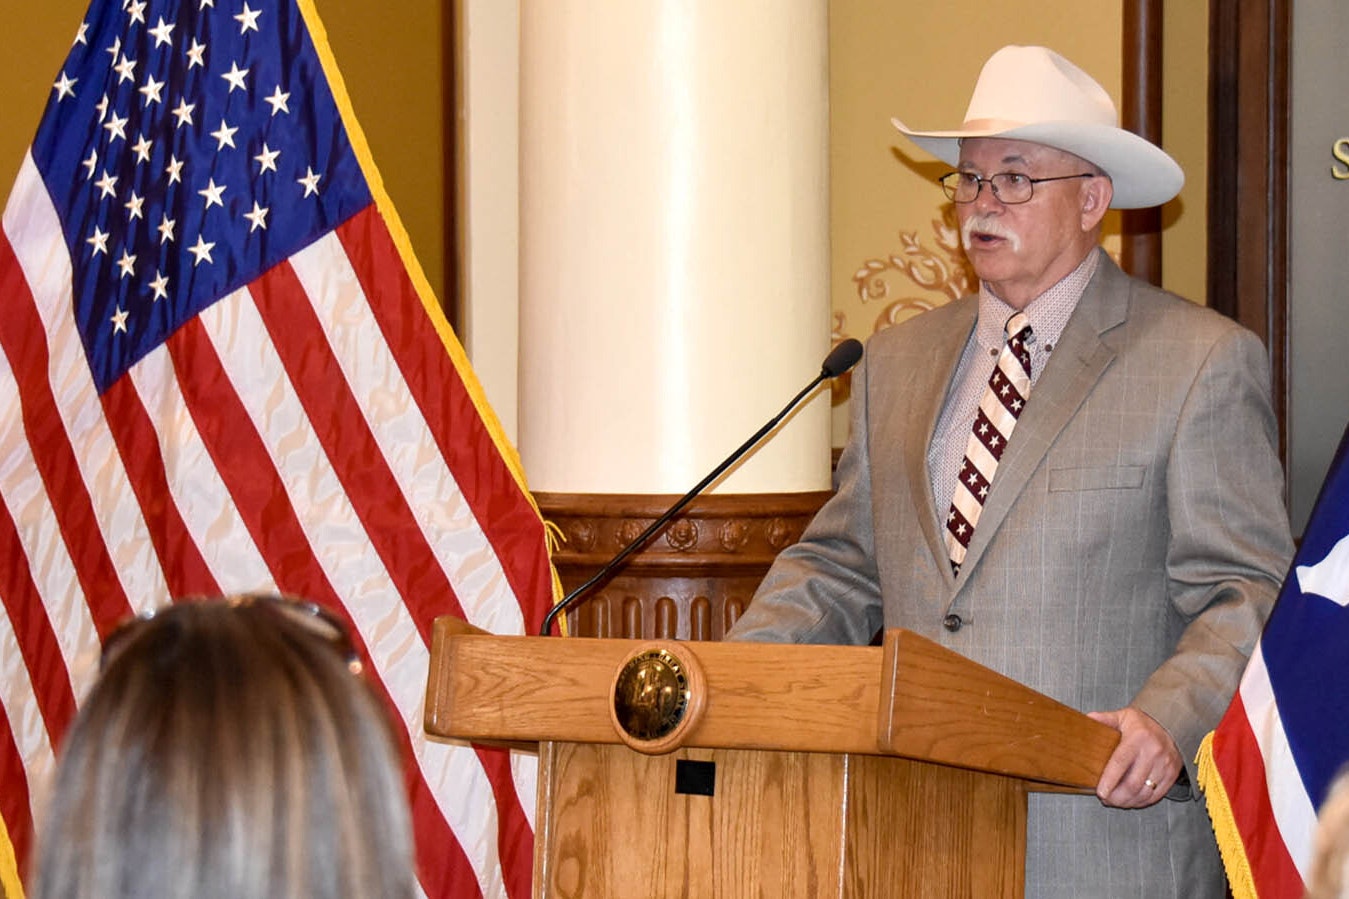 Former Fremont County Sheriff Skip Hornecker was inducted into the Wyoming Law Enforcement Hall of Fame last week at the Capitol in Cheyenne.